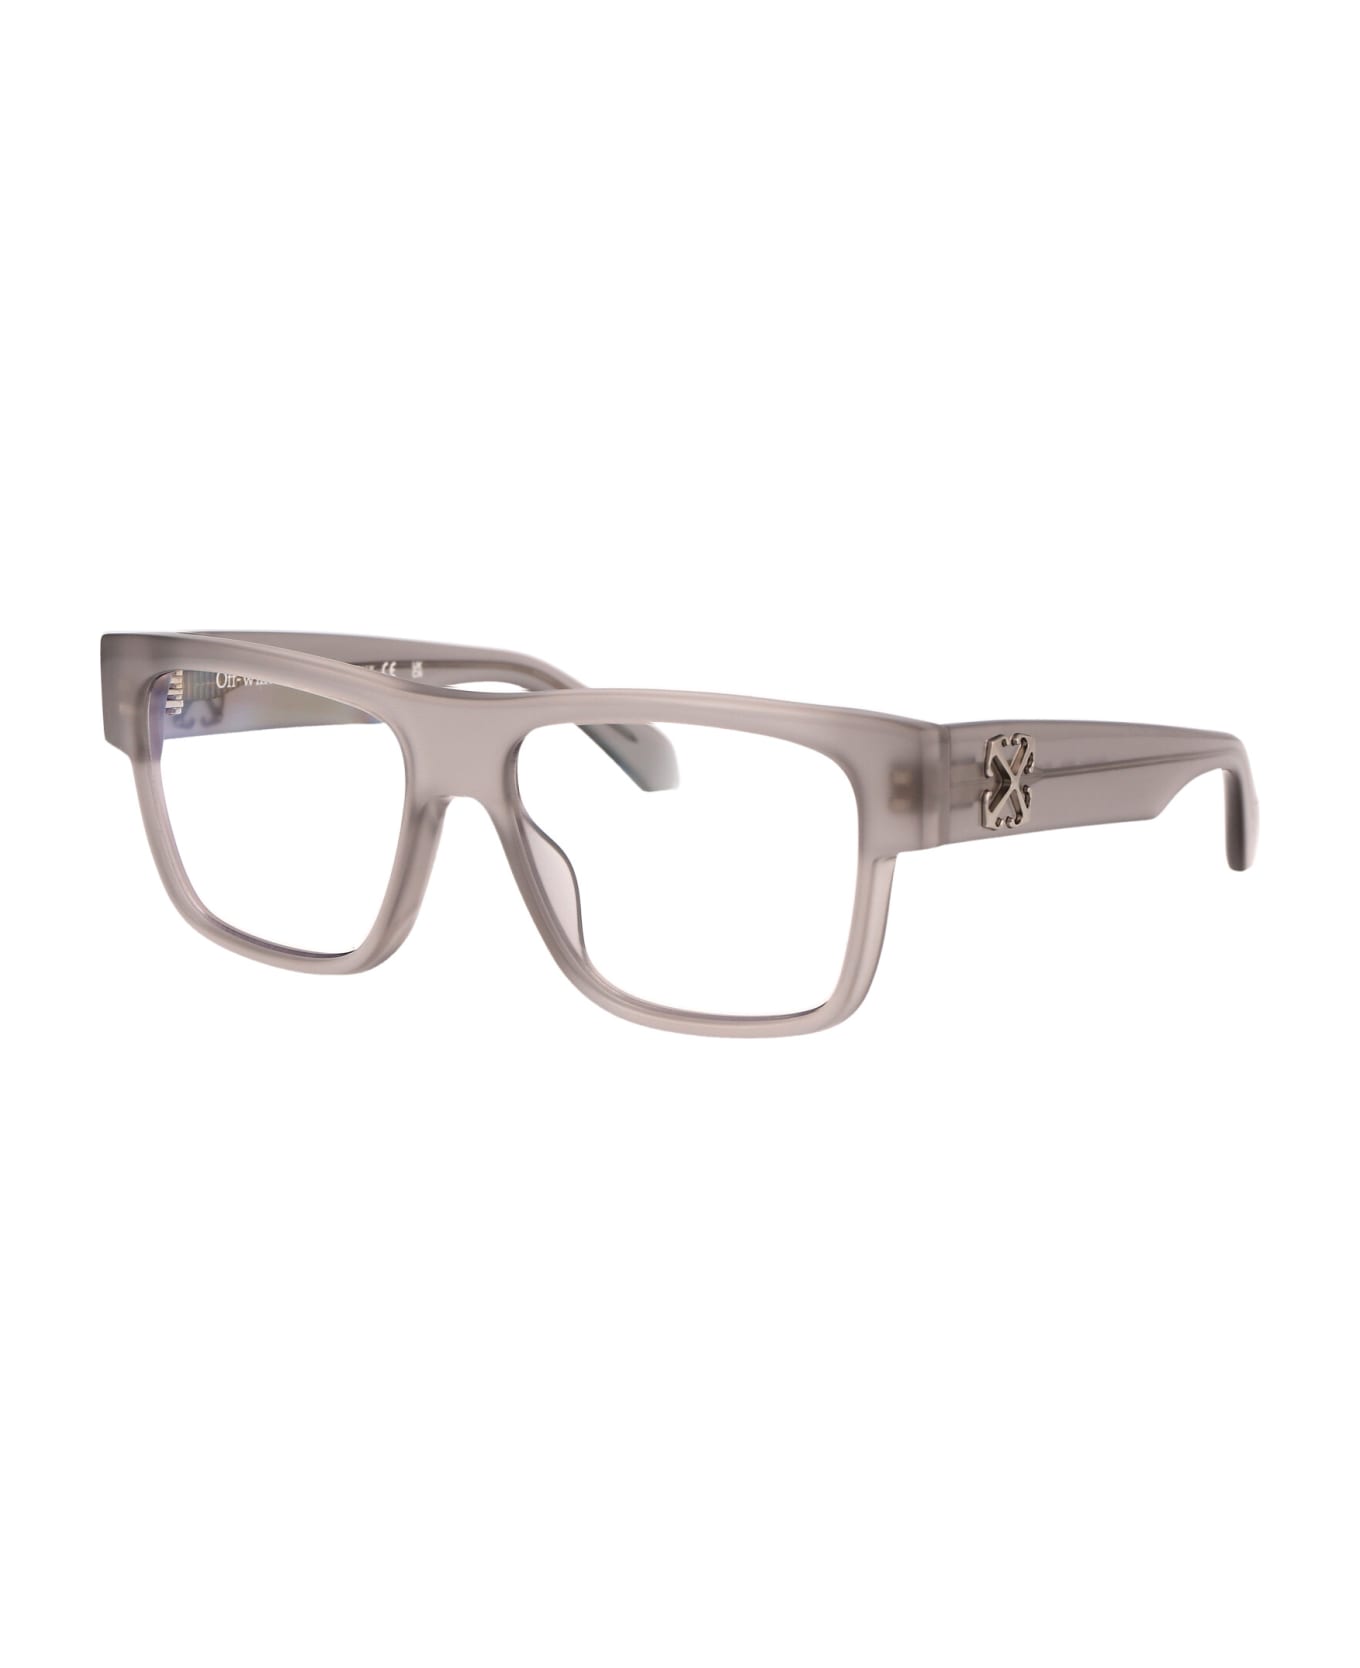 Off-White Optical Style 60 Glasses - 0900 GREY 